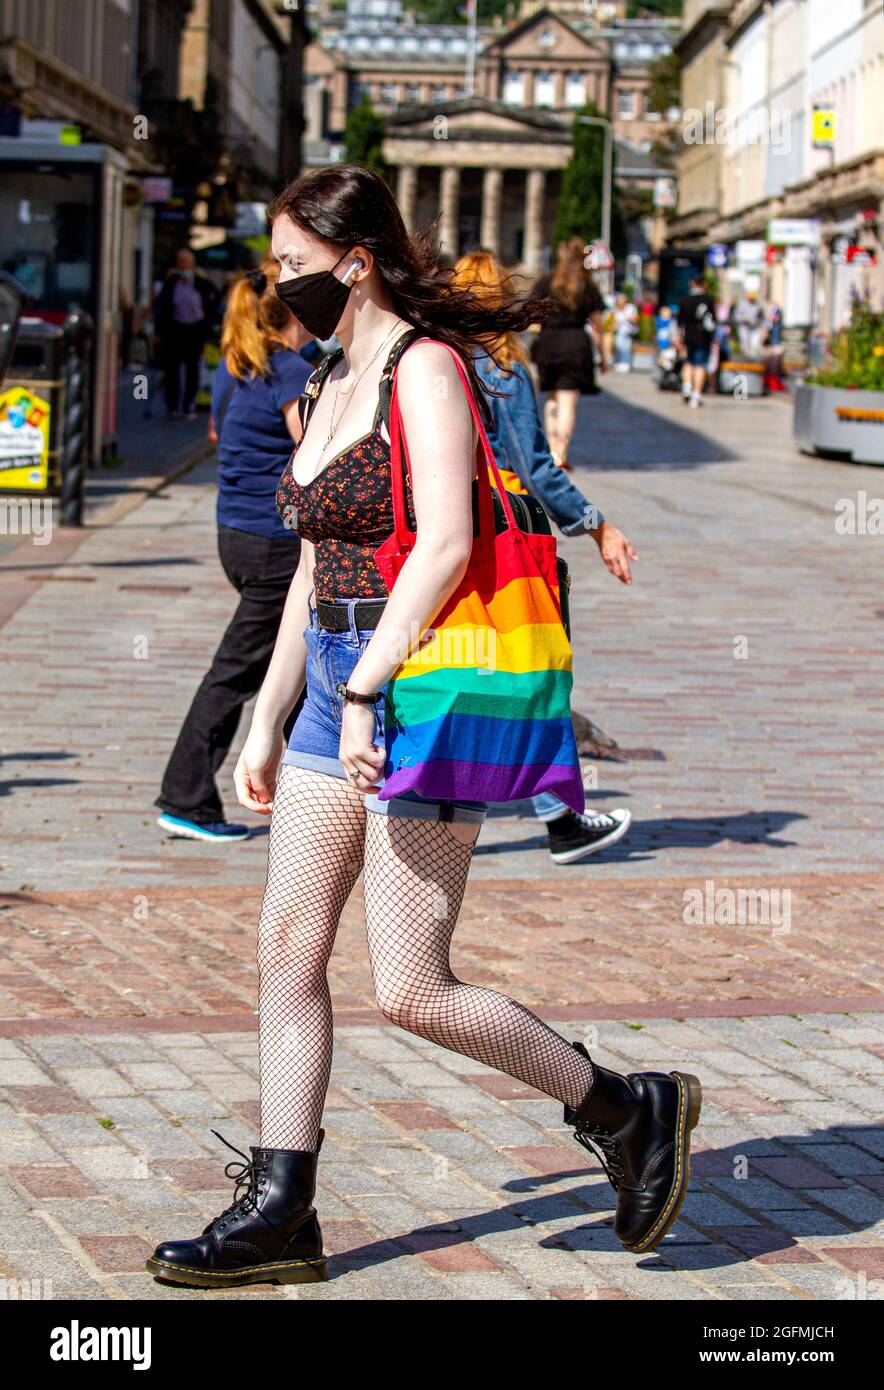 Dundee, Tayside, Scotland, UK. 26th Aug, 2021. UK Weather: A warm sunny day with a slight cool breeze across North East Scotland with temperatures reaching 20°C. A young glamorous woman wearing a facemask walking in the warm sunshine whilst enjoying a day out in Dundee city centre. Credit: Dundee Photographics/Alamy Live News Stock Photo